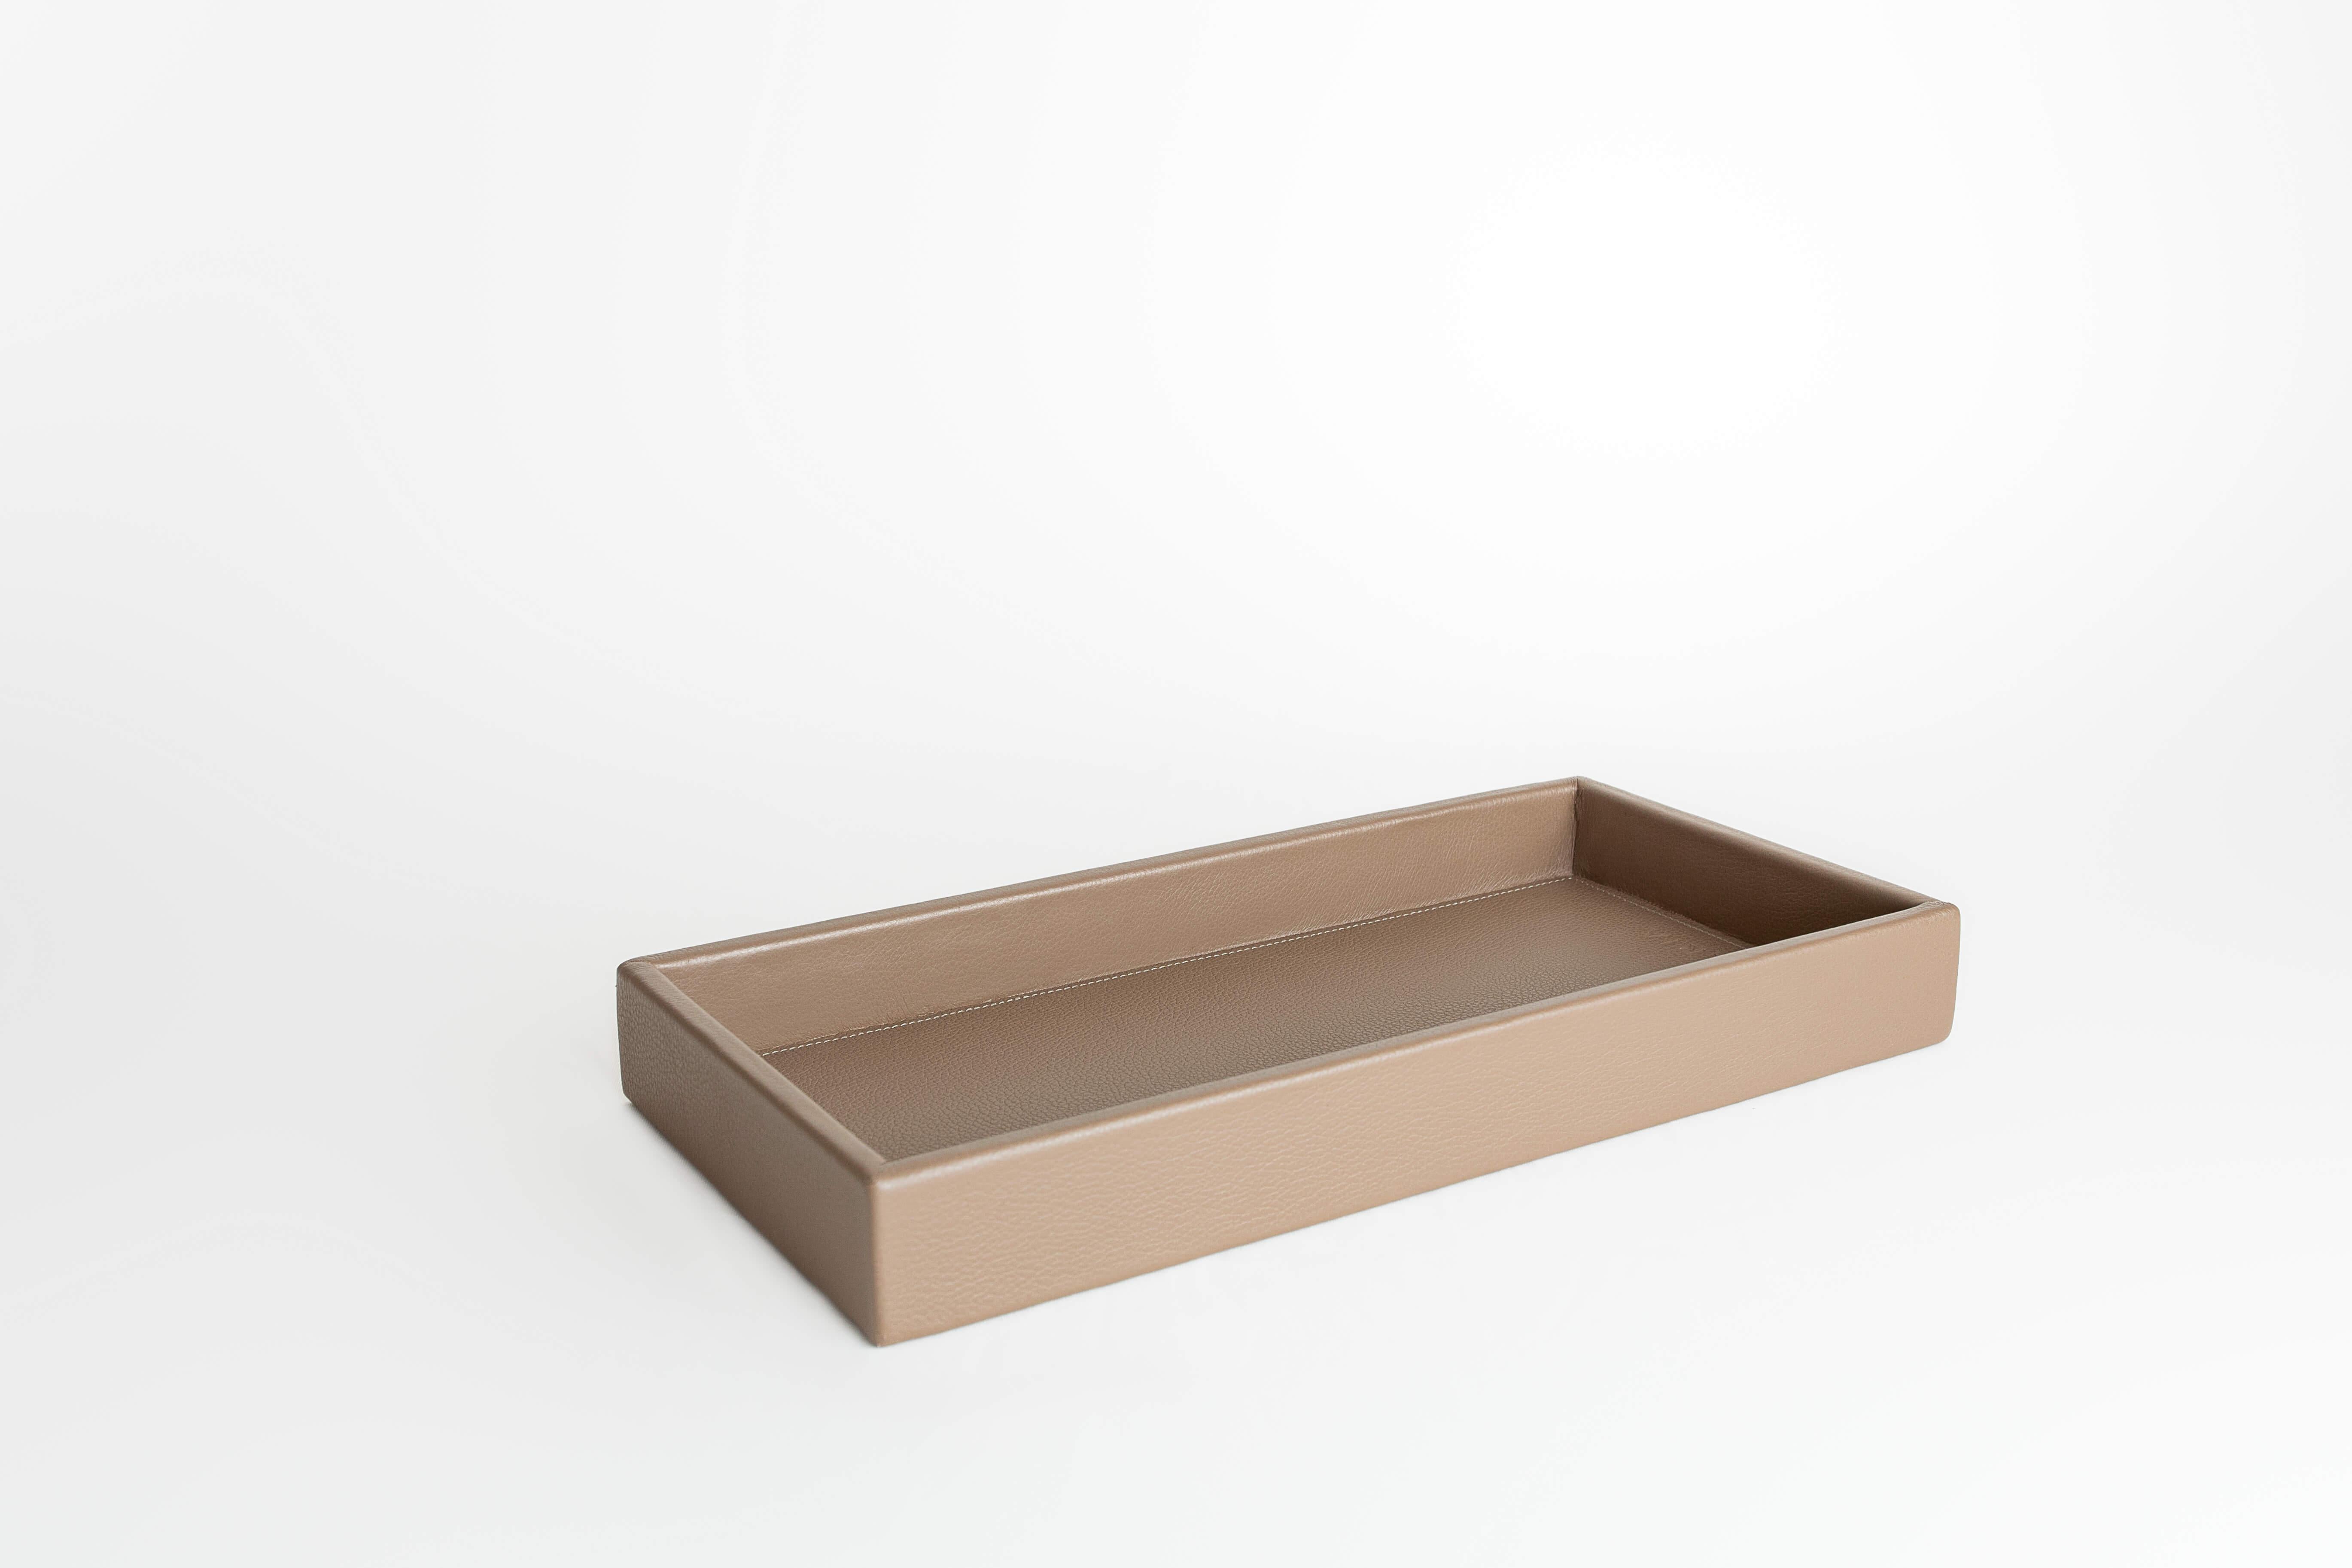 Brazilian Leather Tray, Medium A Rectangular Tray - Handmade in Brazil - Color: Clay For Sale